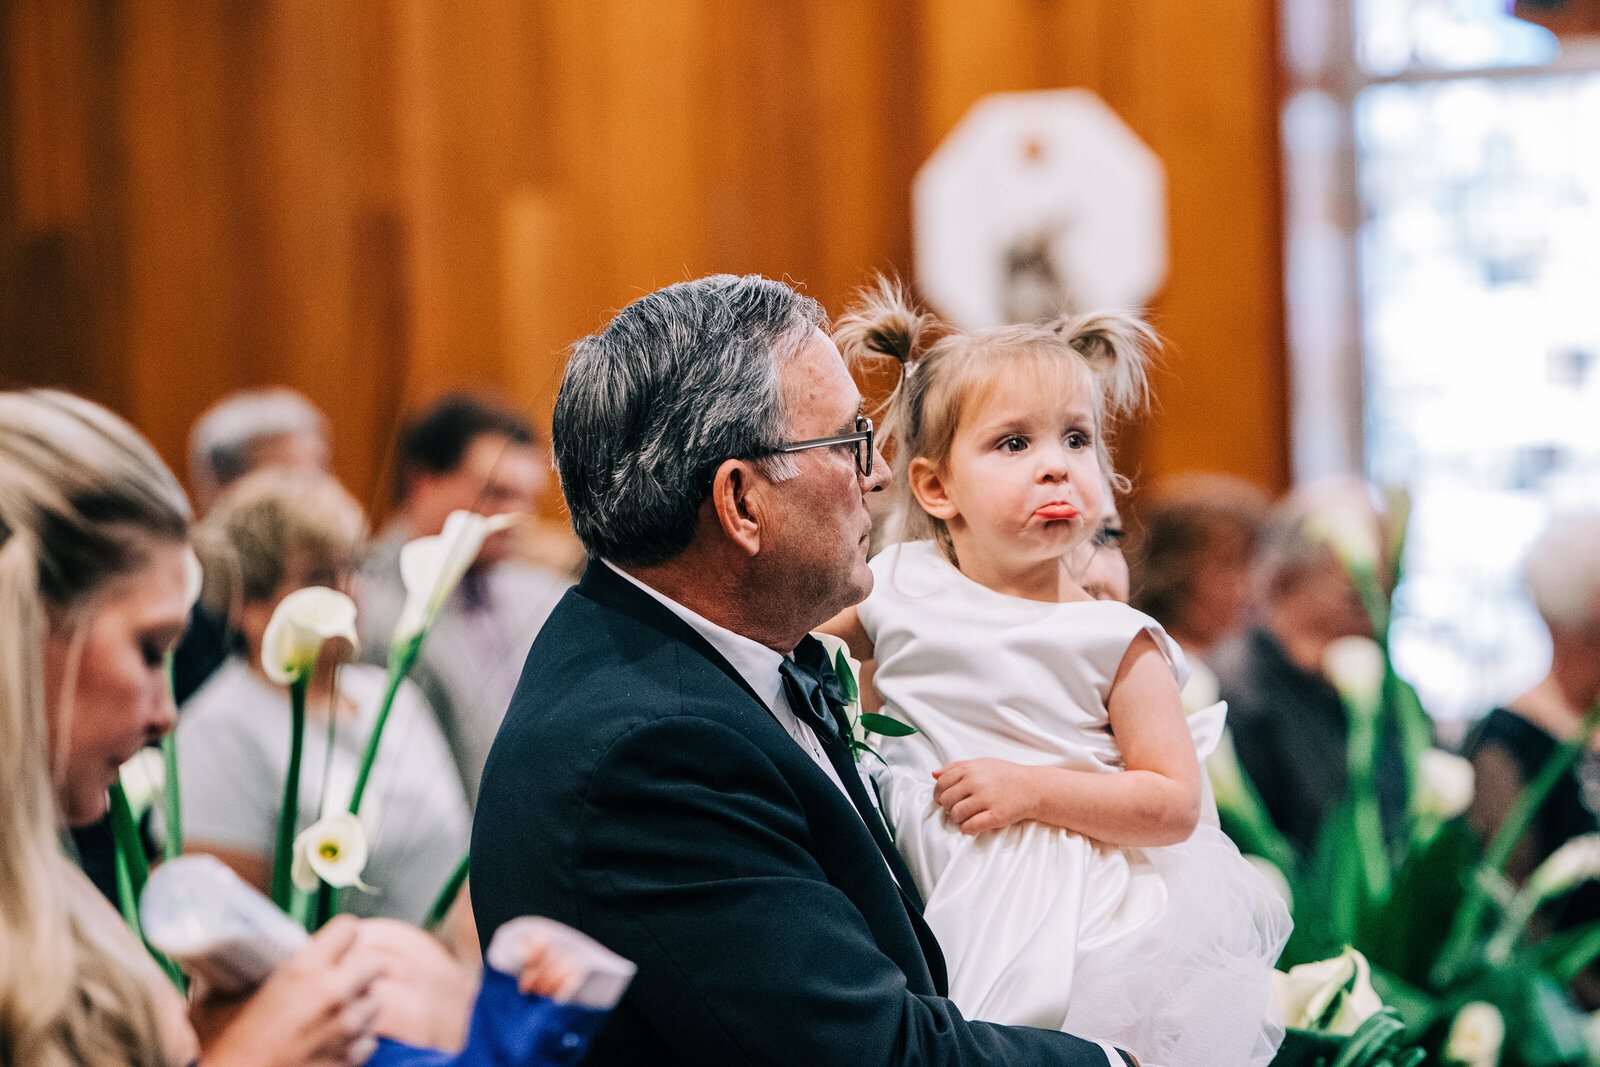 Capturing a real moment of a kid during a wedding ceremony